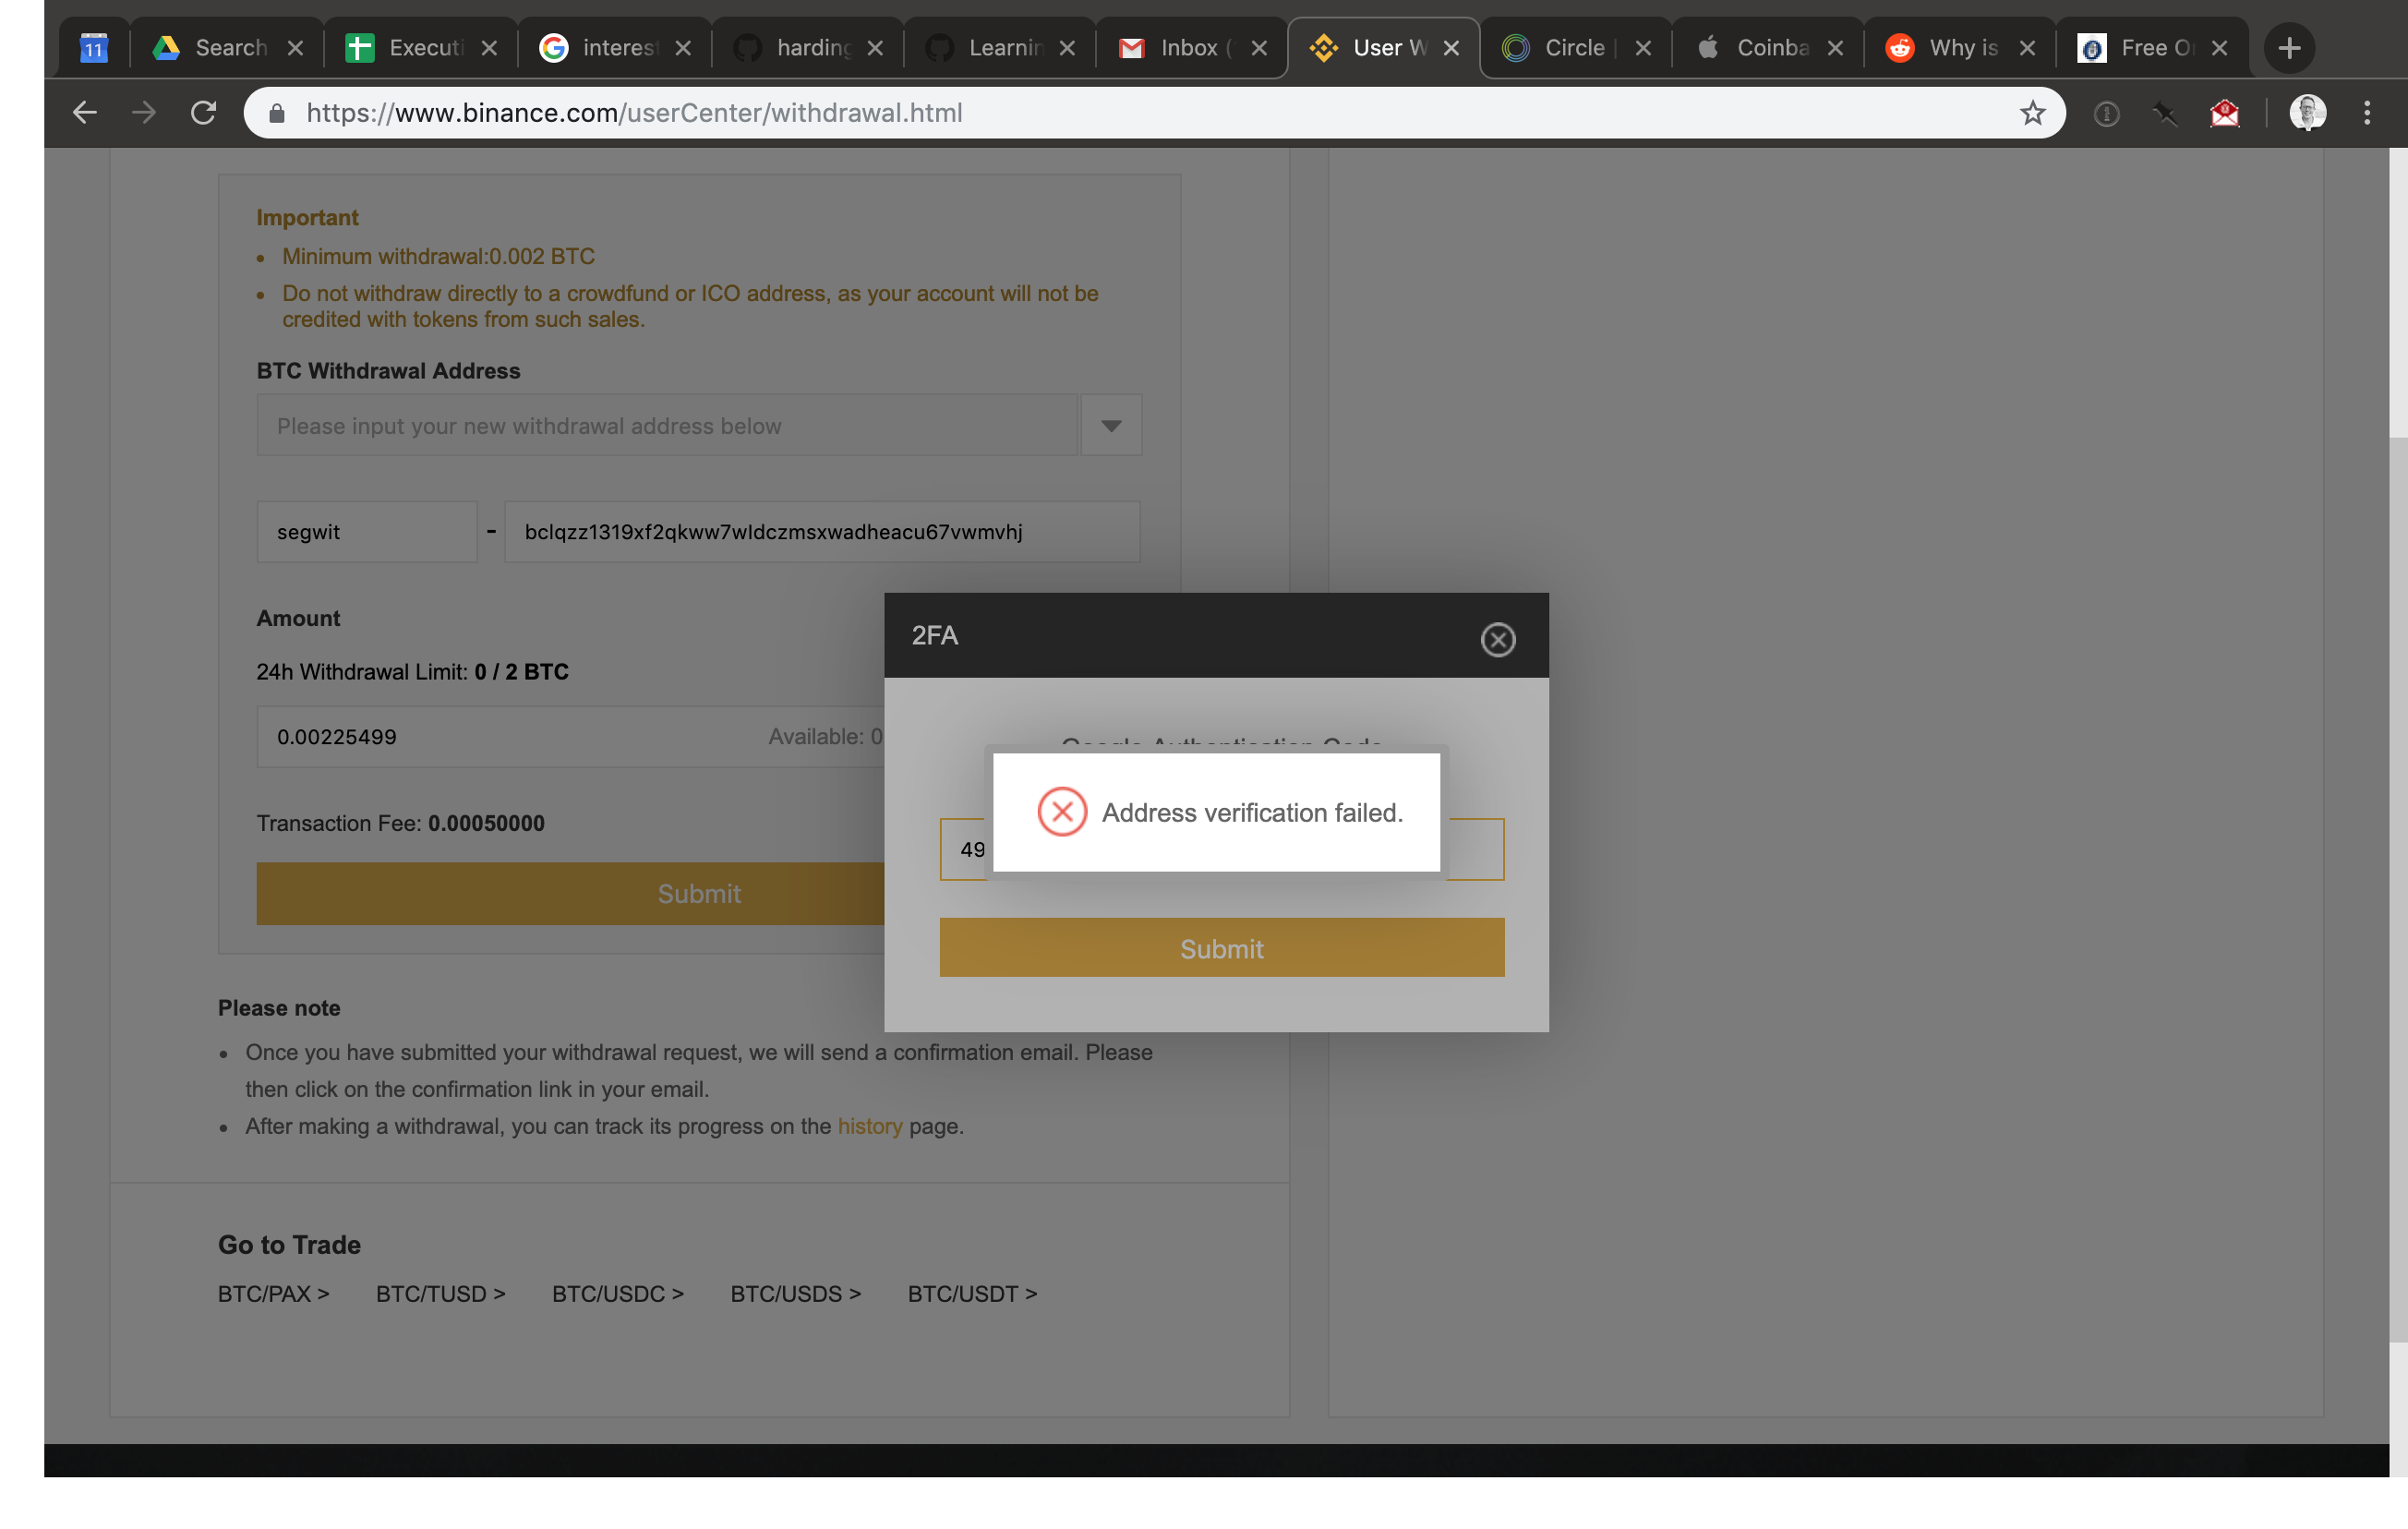 While Binance allows bech32 P2WPKH withdrawals, you cannot add a bech32 address to your address book _from the send screen_. While attempting to add a bech32 address, after the two-factor authentication code, an address error message appears.
